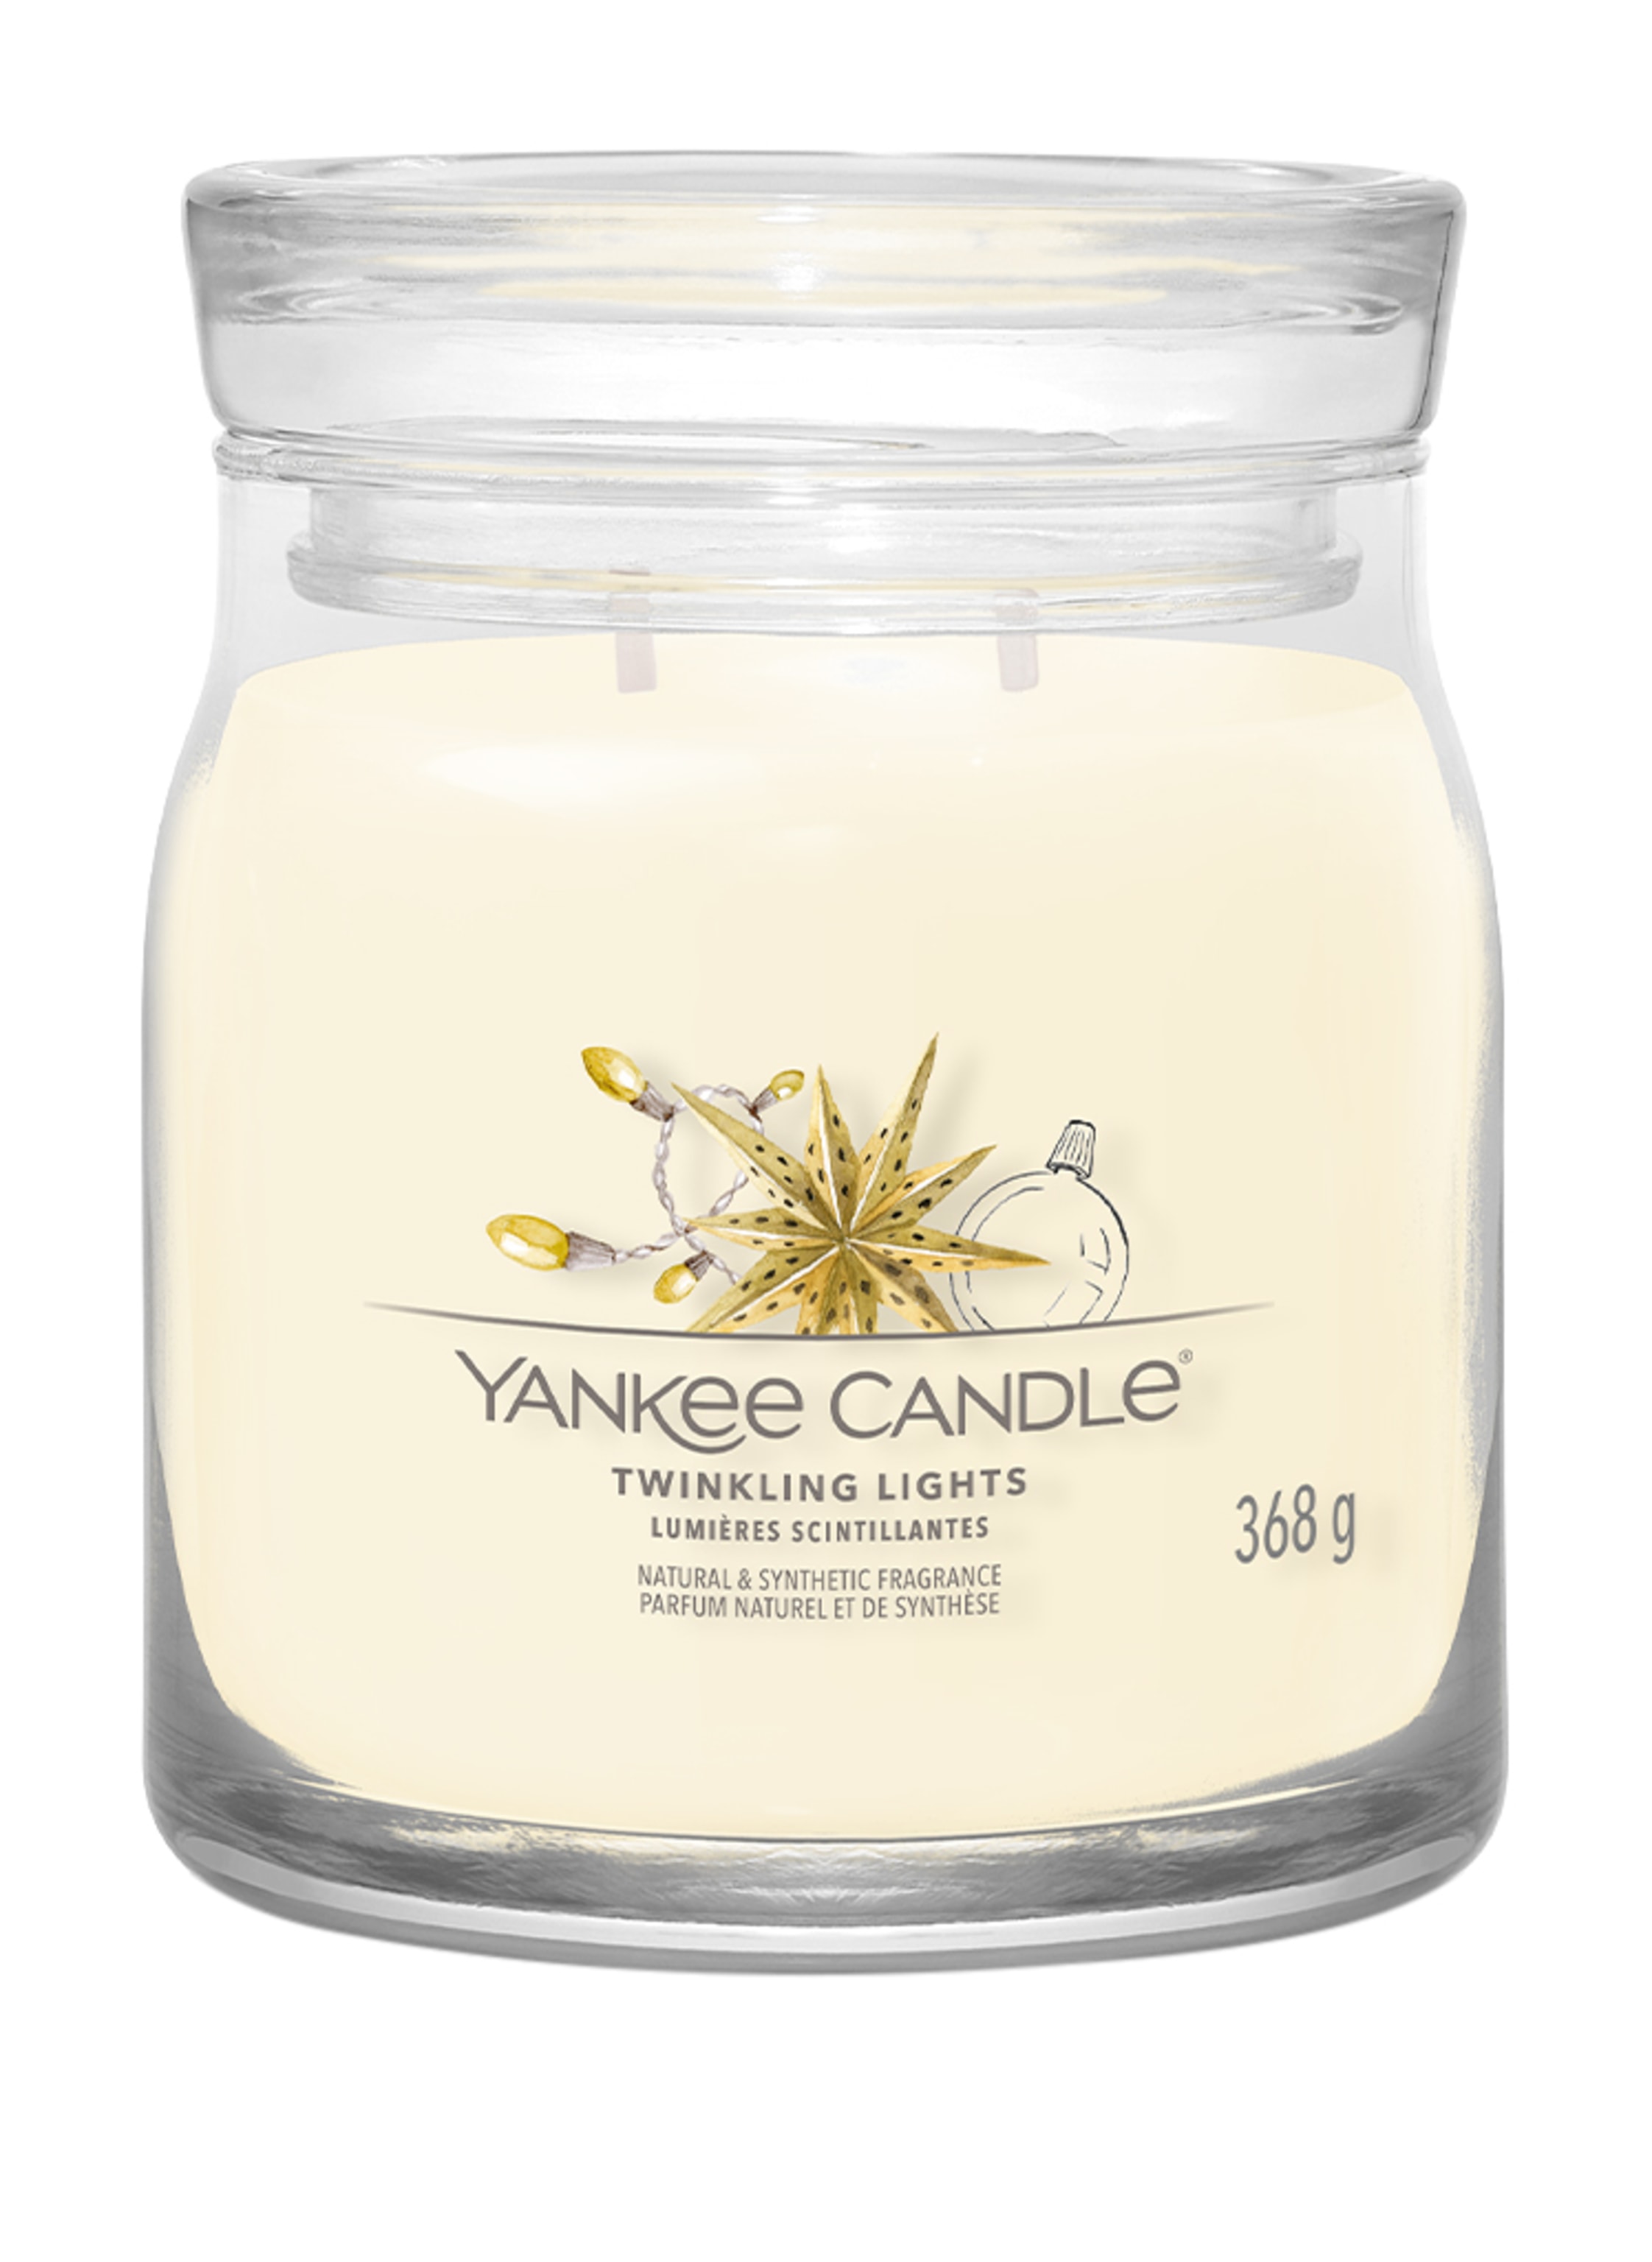 YANKEE CANDLE TWINKLING LIGHTS